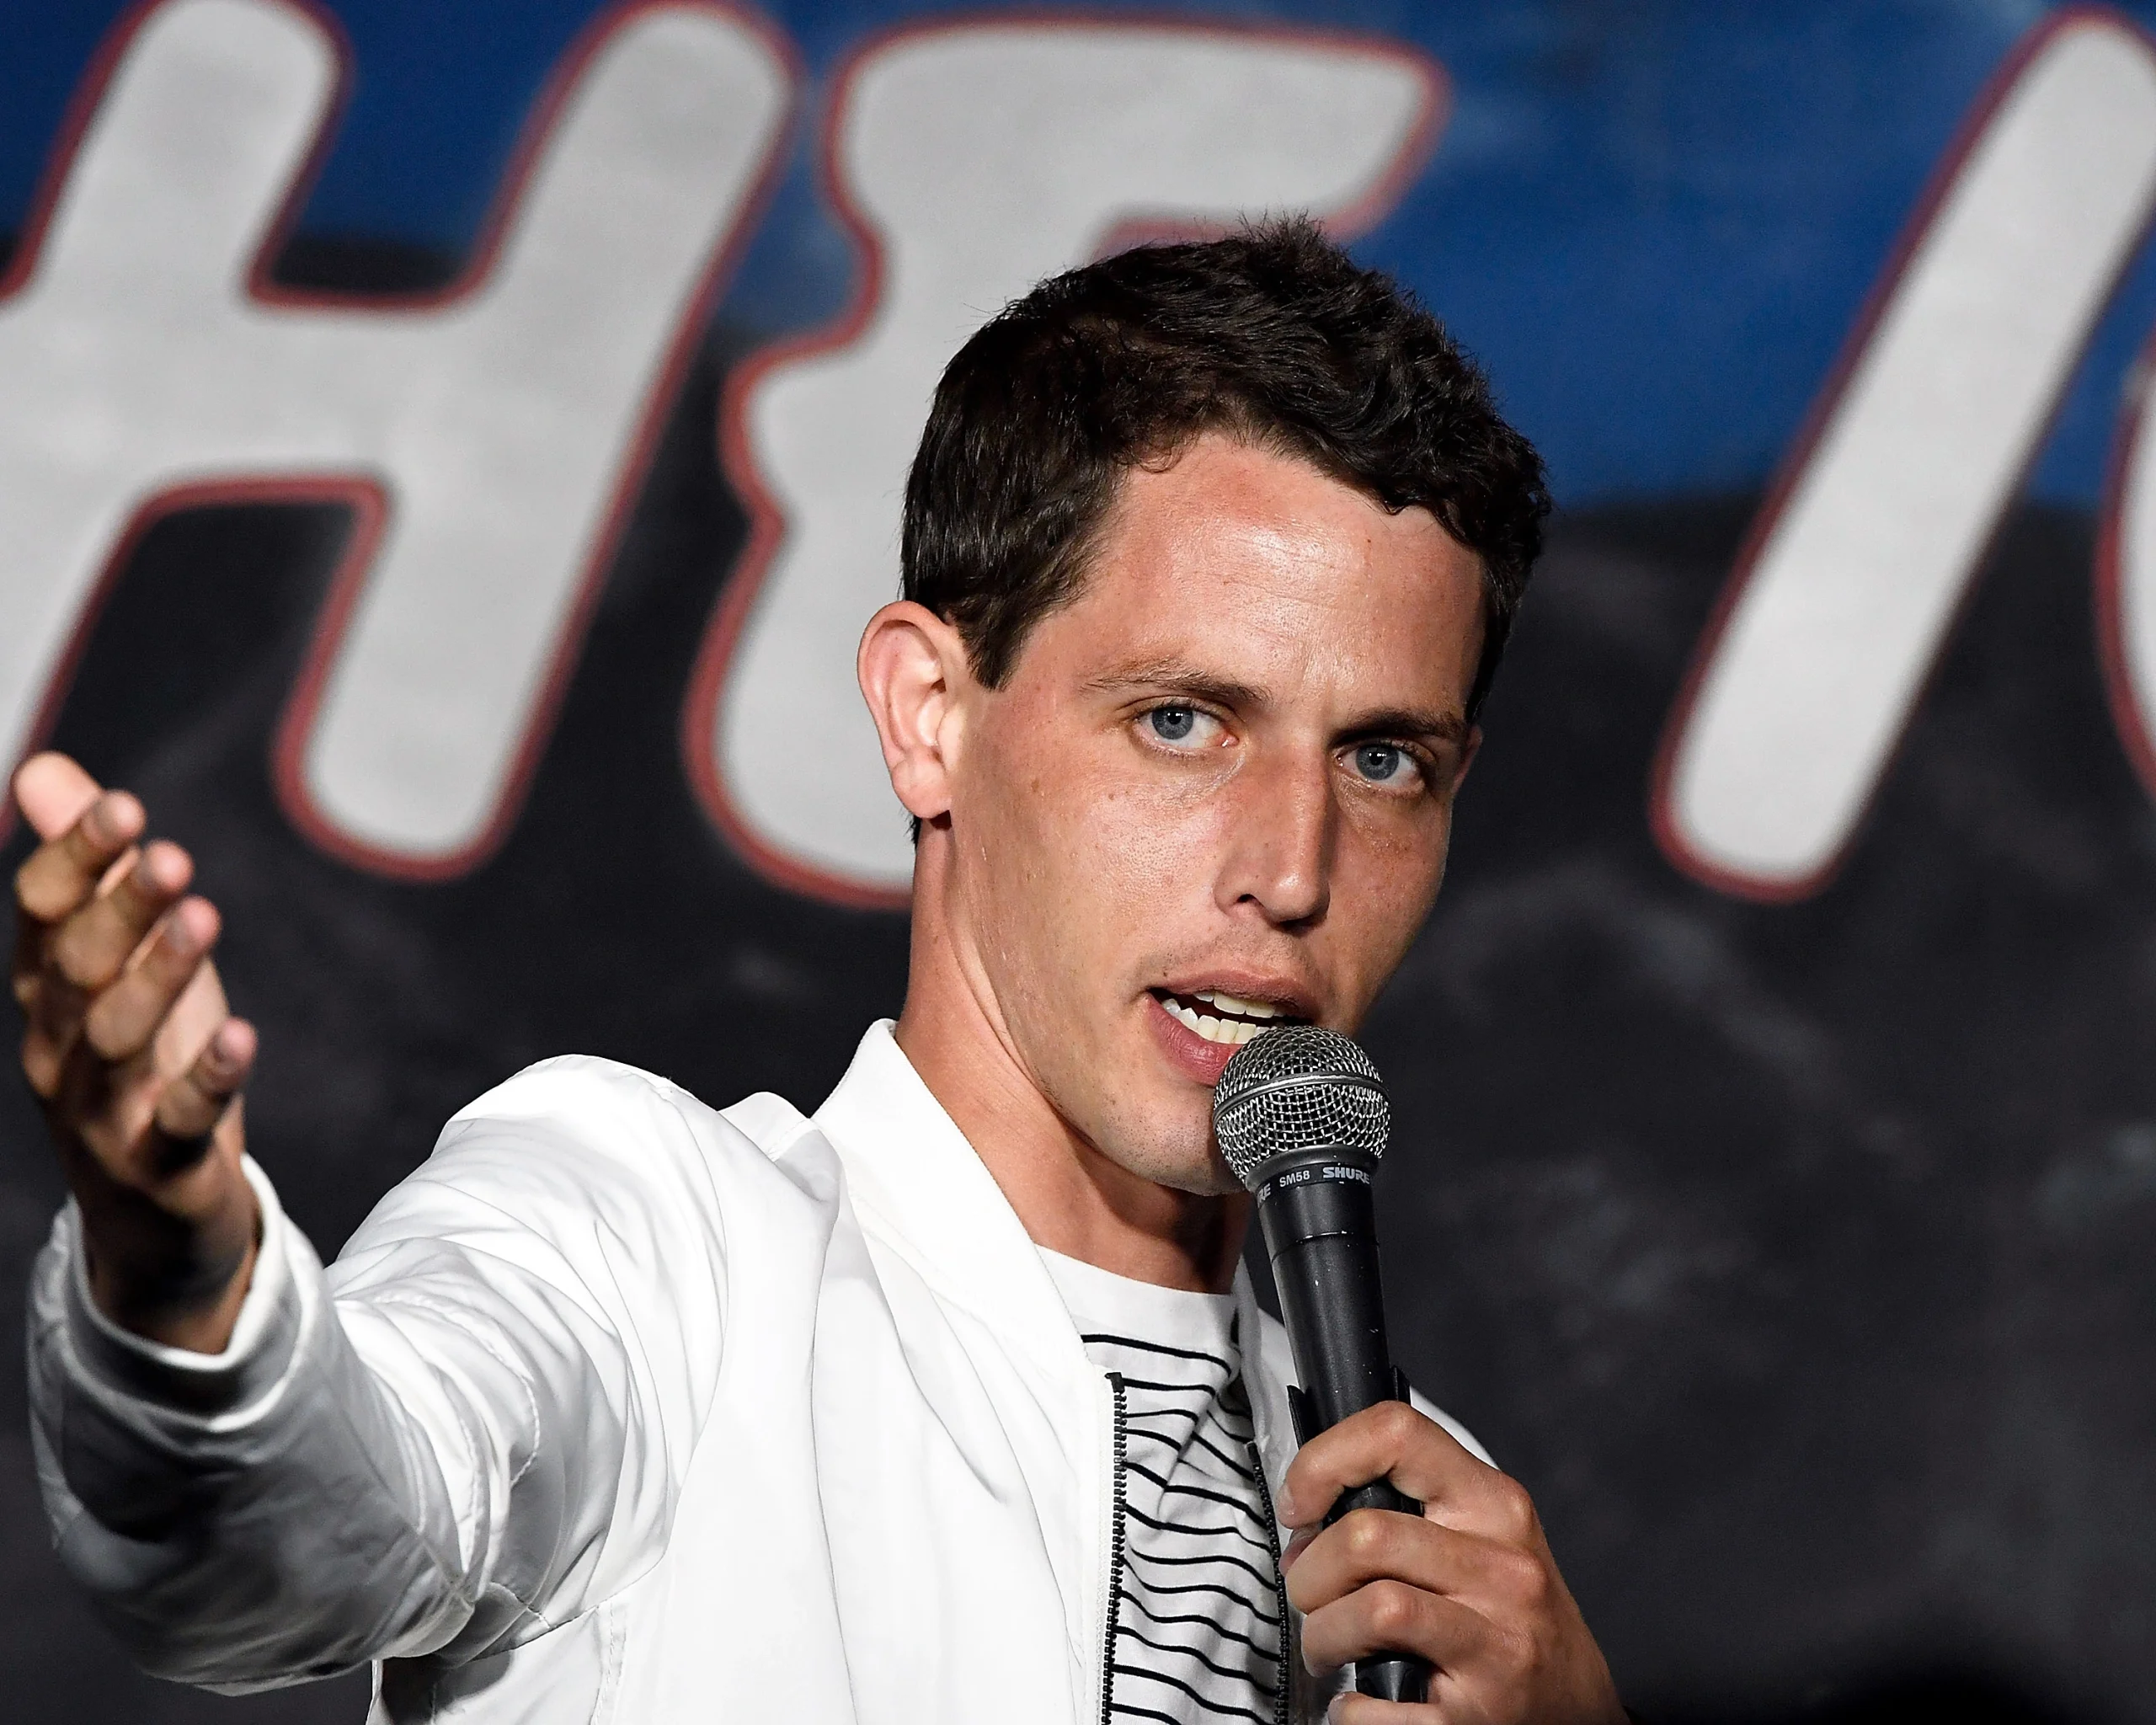 Who Is Tony Hinchcliffe? Age, Bio, Career, Net Worth And More Of The Comedian